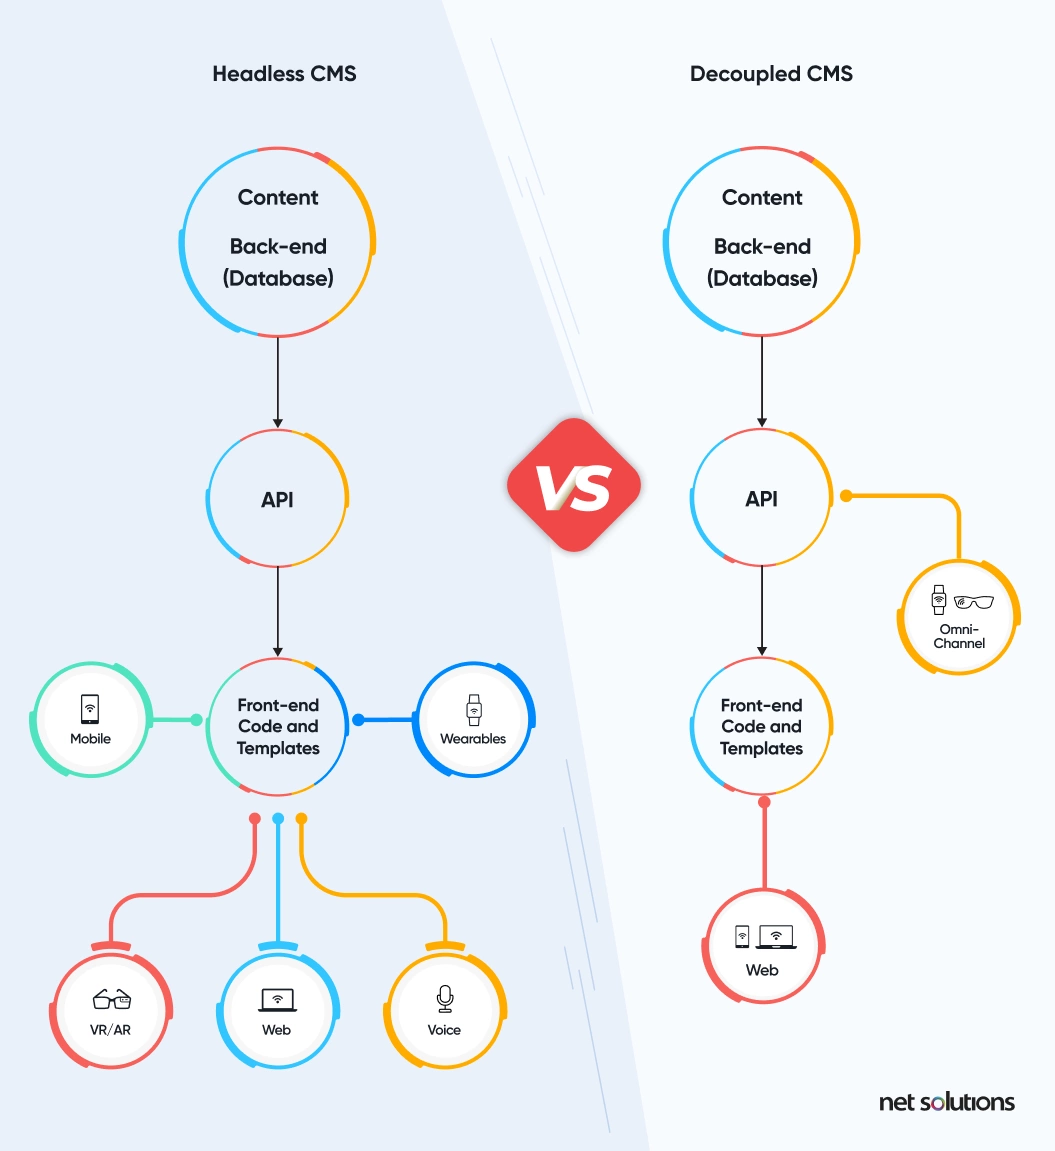 The difference between a headless CMS and a decoupled CMS